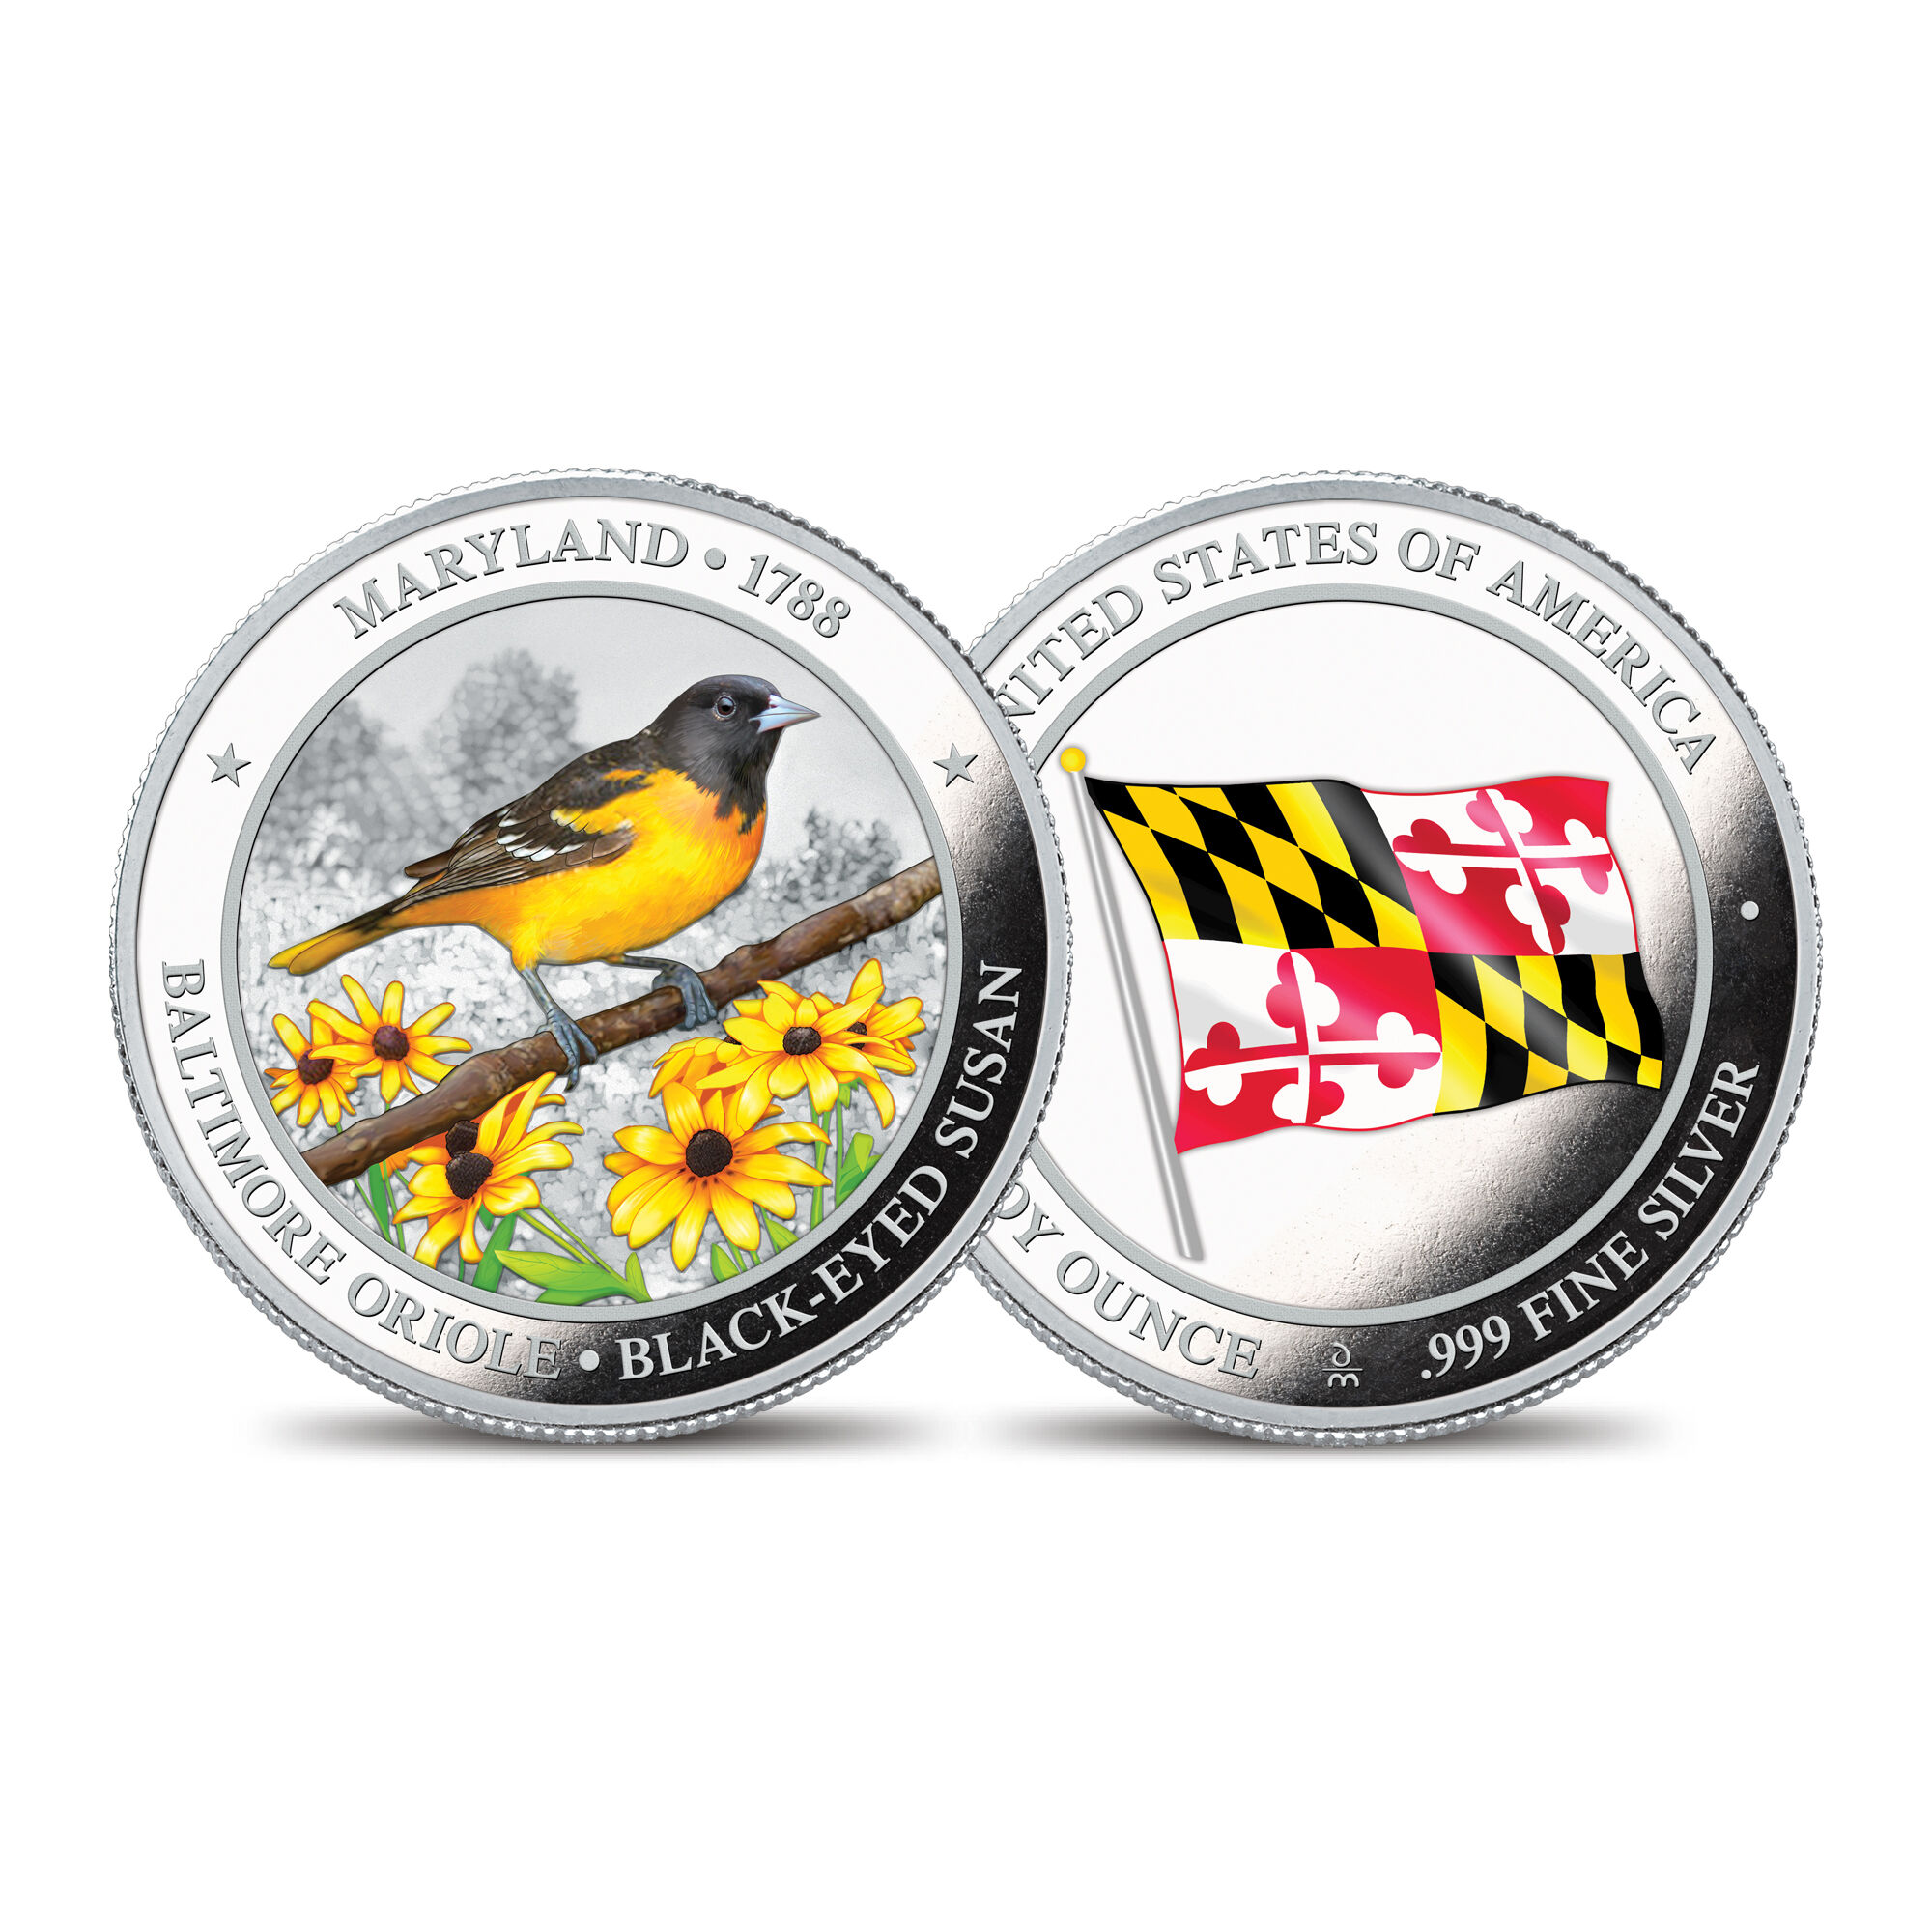 The State Bird and Flower Silver Commemoratives 2167 0088 a commemorativeMD